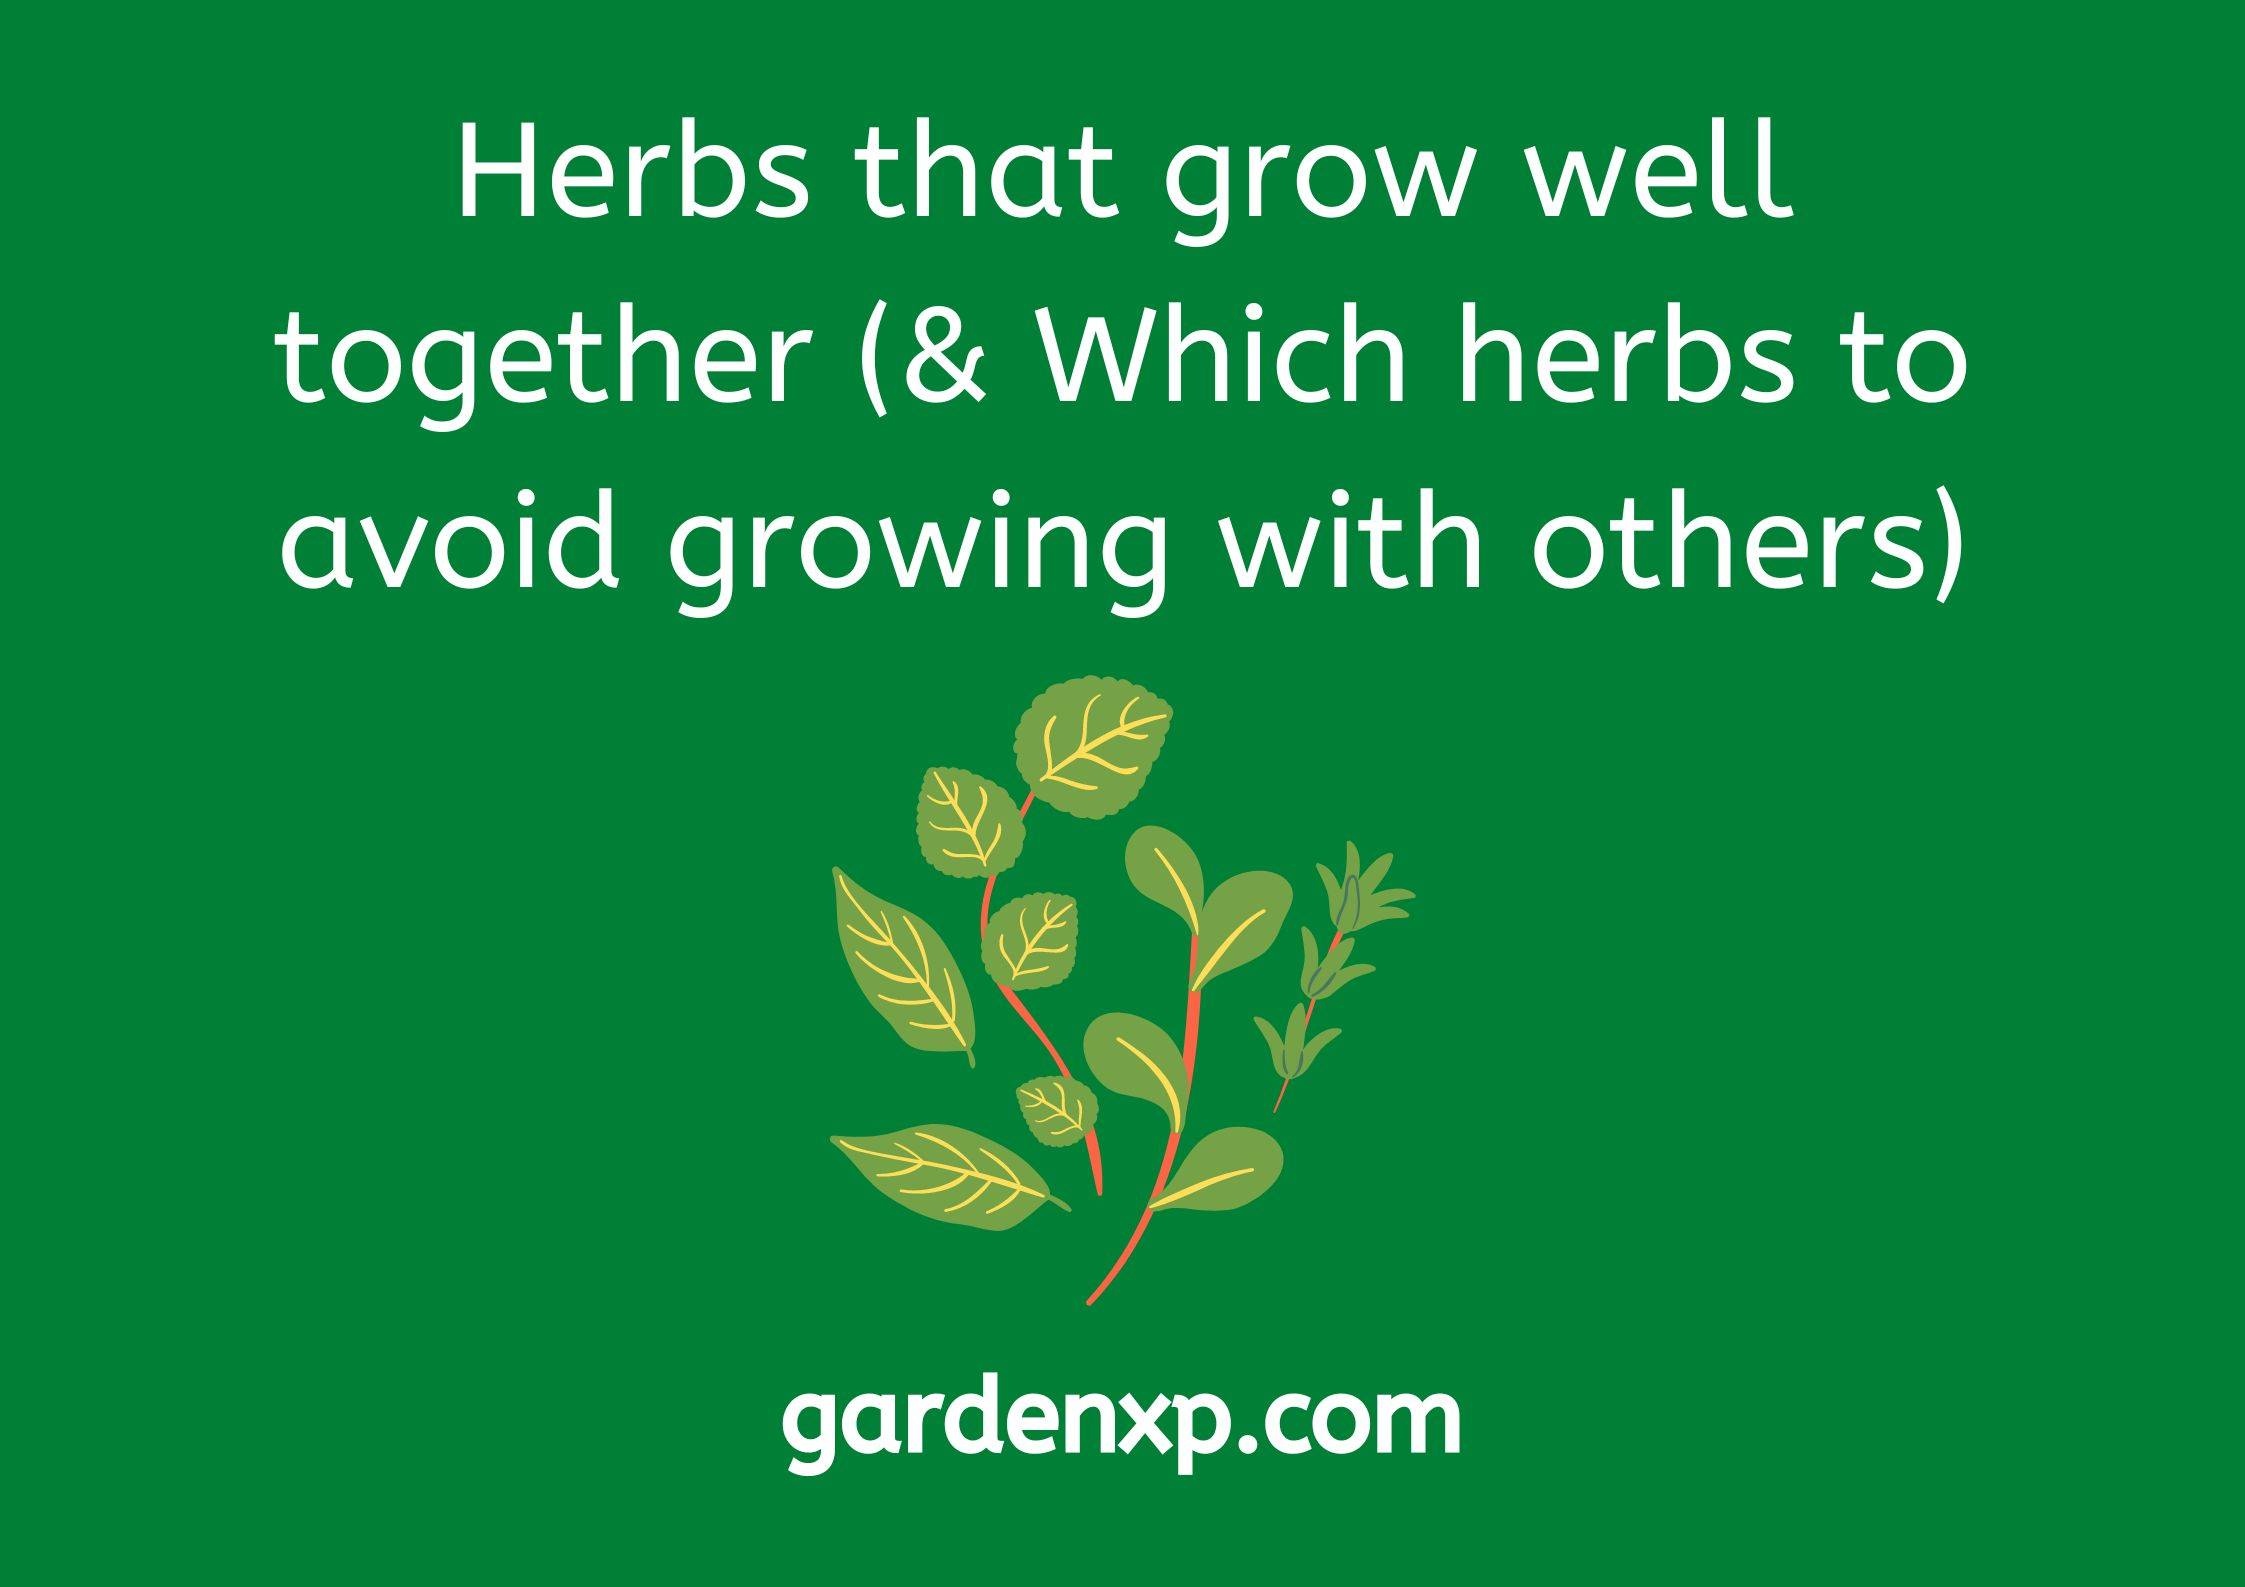 Herbs that grow well together (& Which herbs to avoid growing with others)